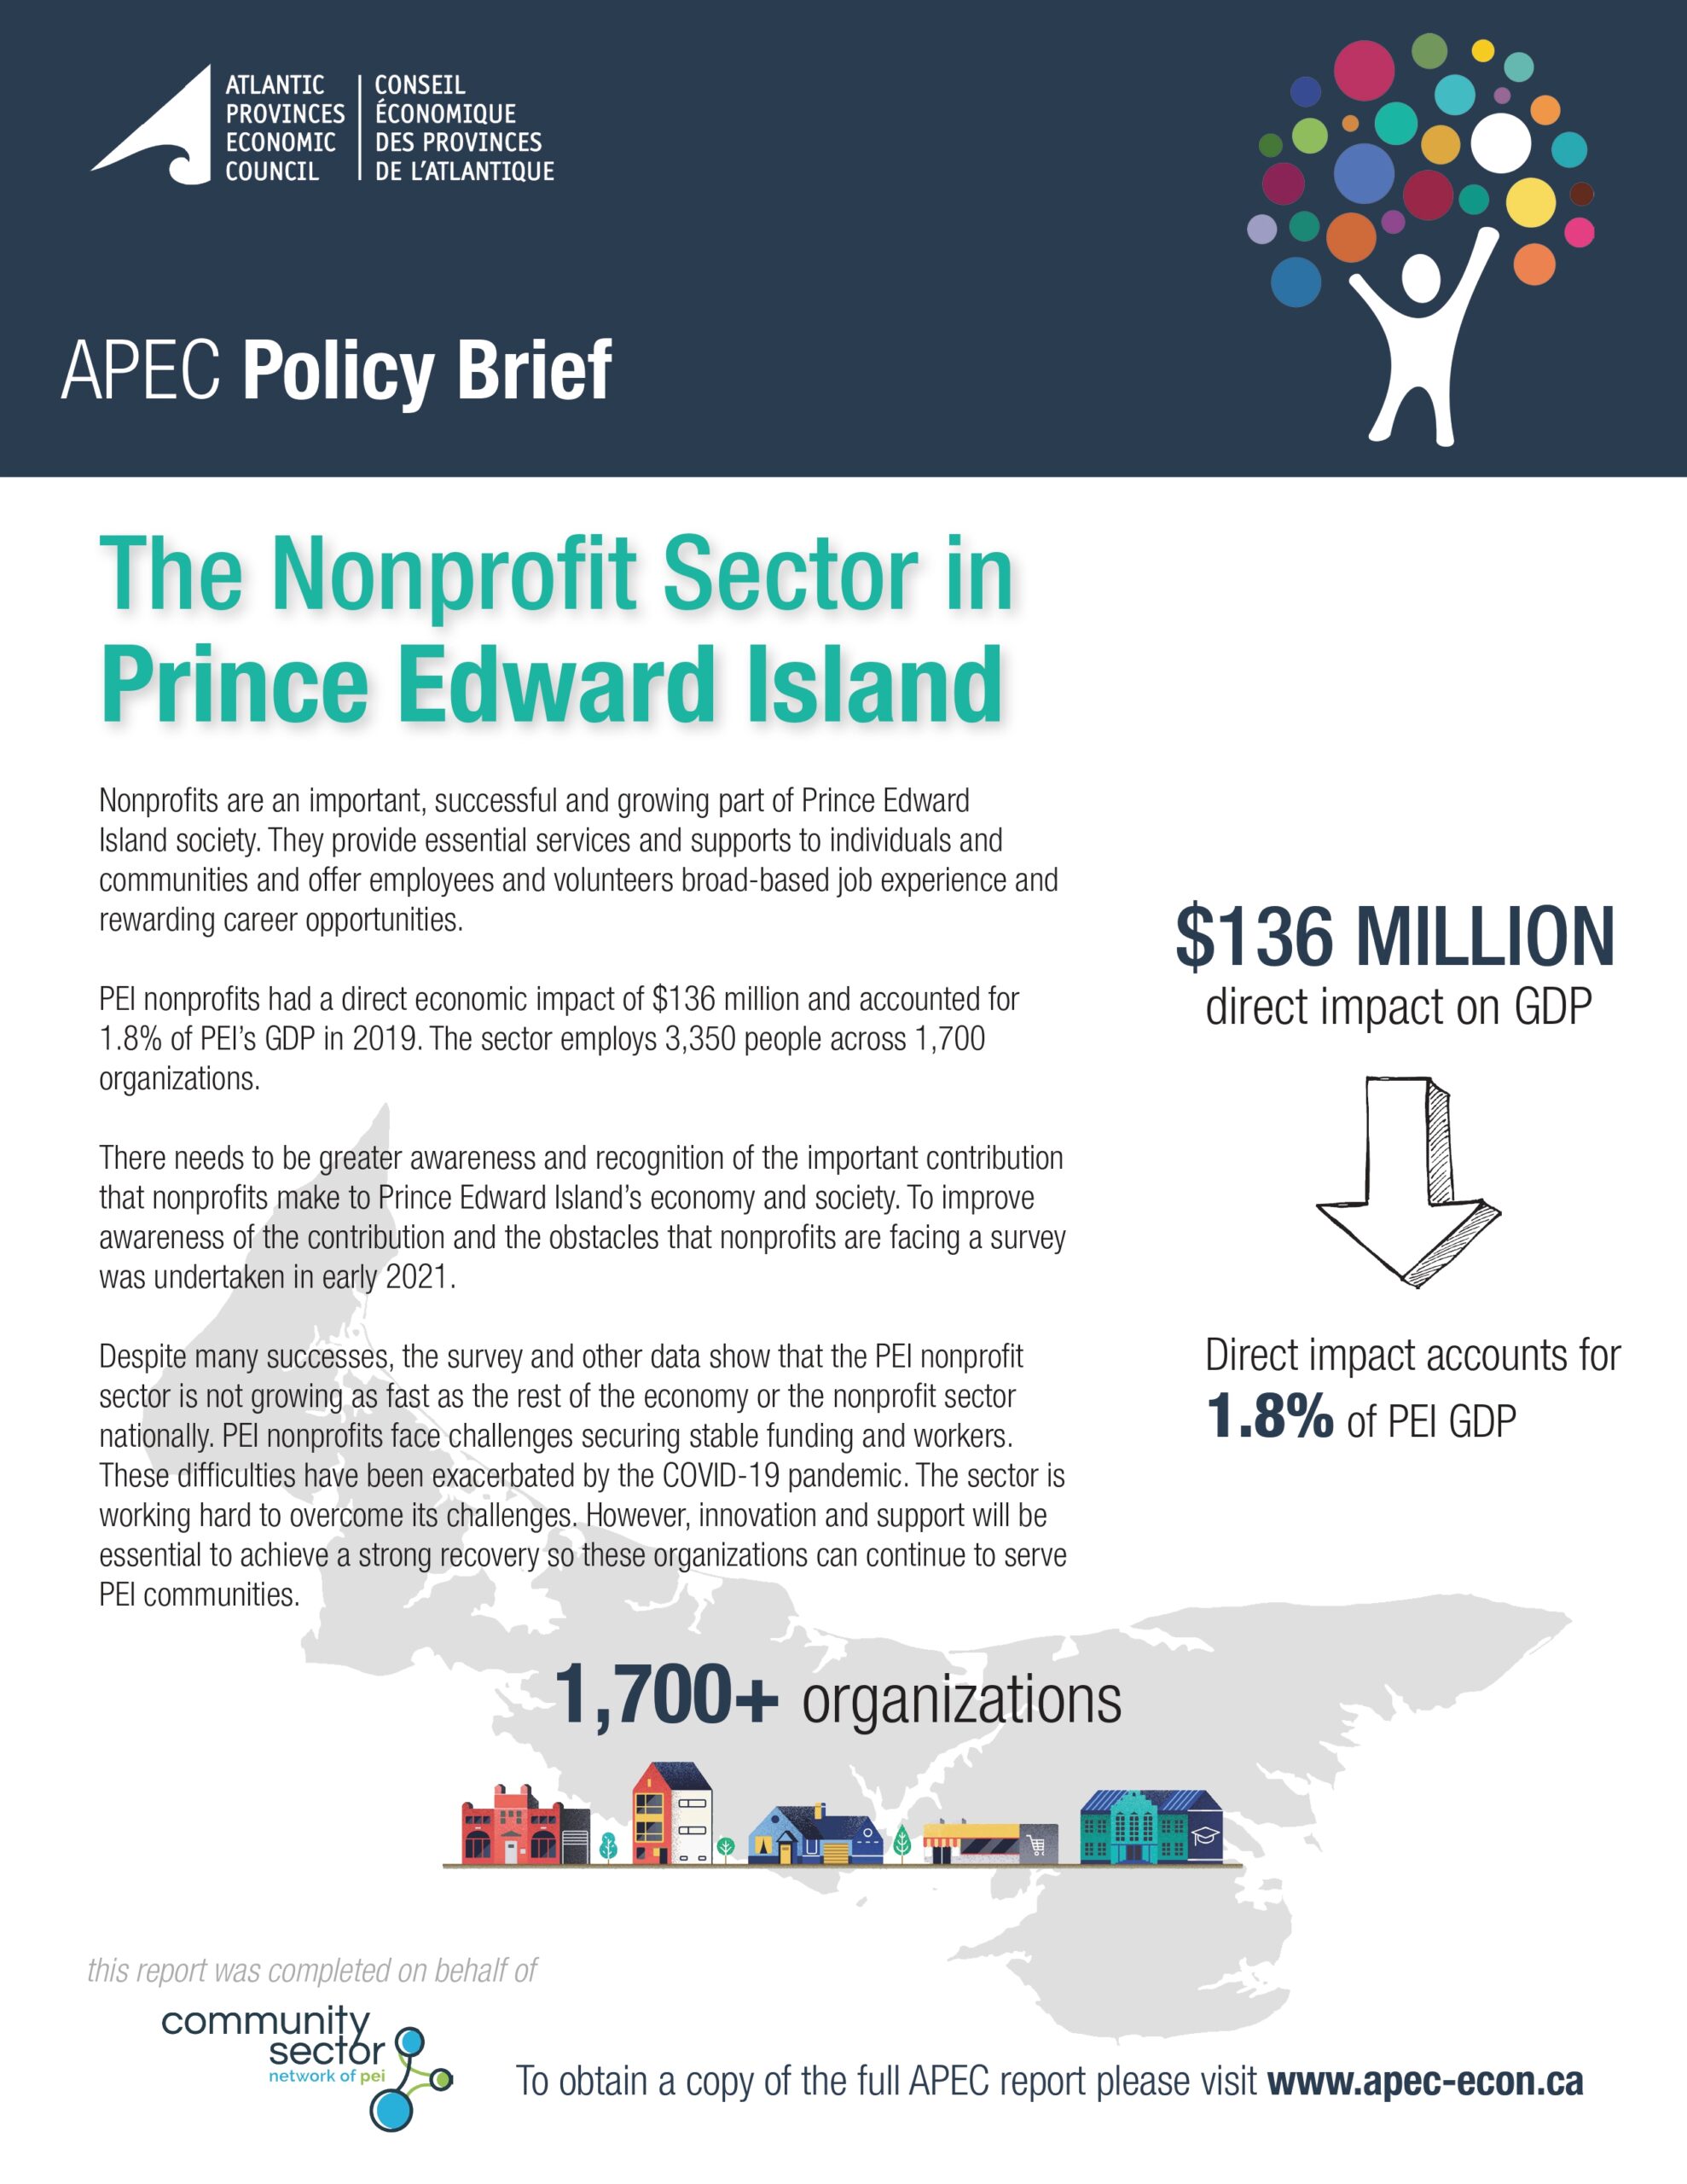 Nonprofits are an important, successful and growing part of Prince Edward  Island society. They provide essential services and supports to individuals and communities and offer employees and volunteers broad-based job experience and rewarding career opportunities.   PEI nonprofits had a direct economic impact of $136 million and accounted for  1.8% of PEI’s GDP in 2019. The sector employs 3,350 people across 1,700  organizations.   There needs to be greater awareness and recognition of the important contribution that nonprofits make to Prince Edward Island’s economy and society. To improve awareness of the contribution and the obstacles that nonprofits are facing a survey was undertaken in early 2021.   Despite many successes, the survey and other data show that the PEI nonprofit sector is not growing as fast as the rest of the economy or the nonprofit sector nationally. PEI nonprofits face challenges securing stable funding and workers.   These difficulties have been exacerbated by the COVID-19 pandemic. The sector is working hard to overcome its challenges. However, innovation and support will be essential to achieve a strong recovery so these organizations can continue to serve  PEI communities. 